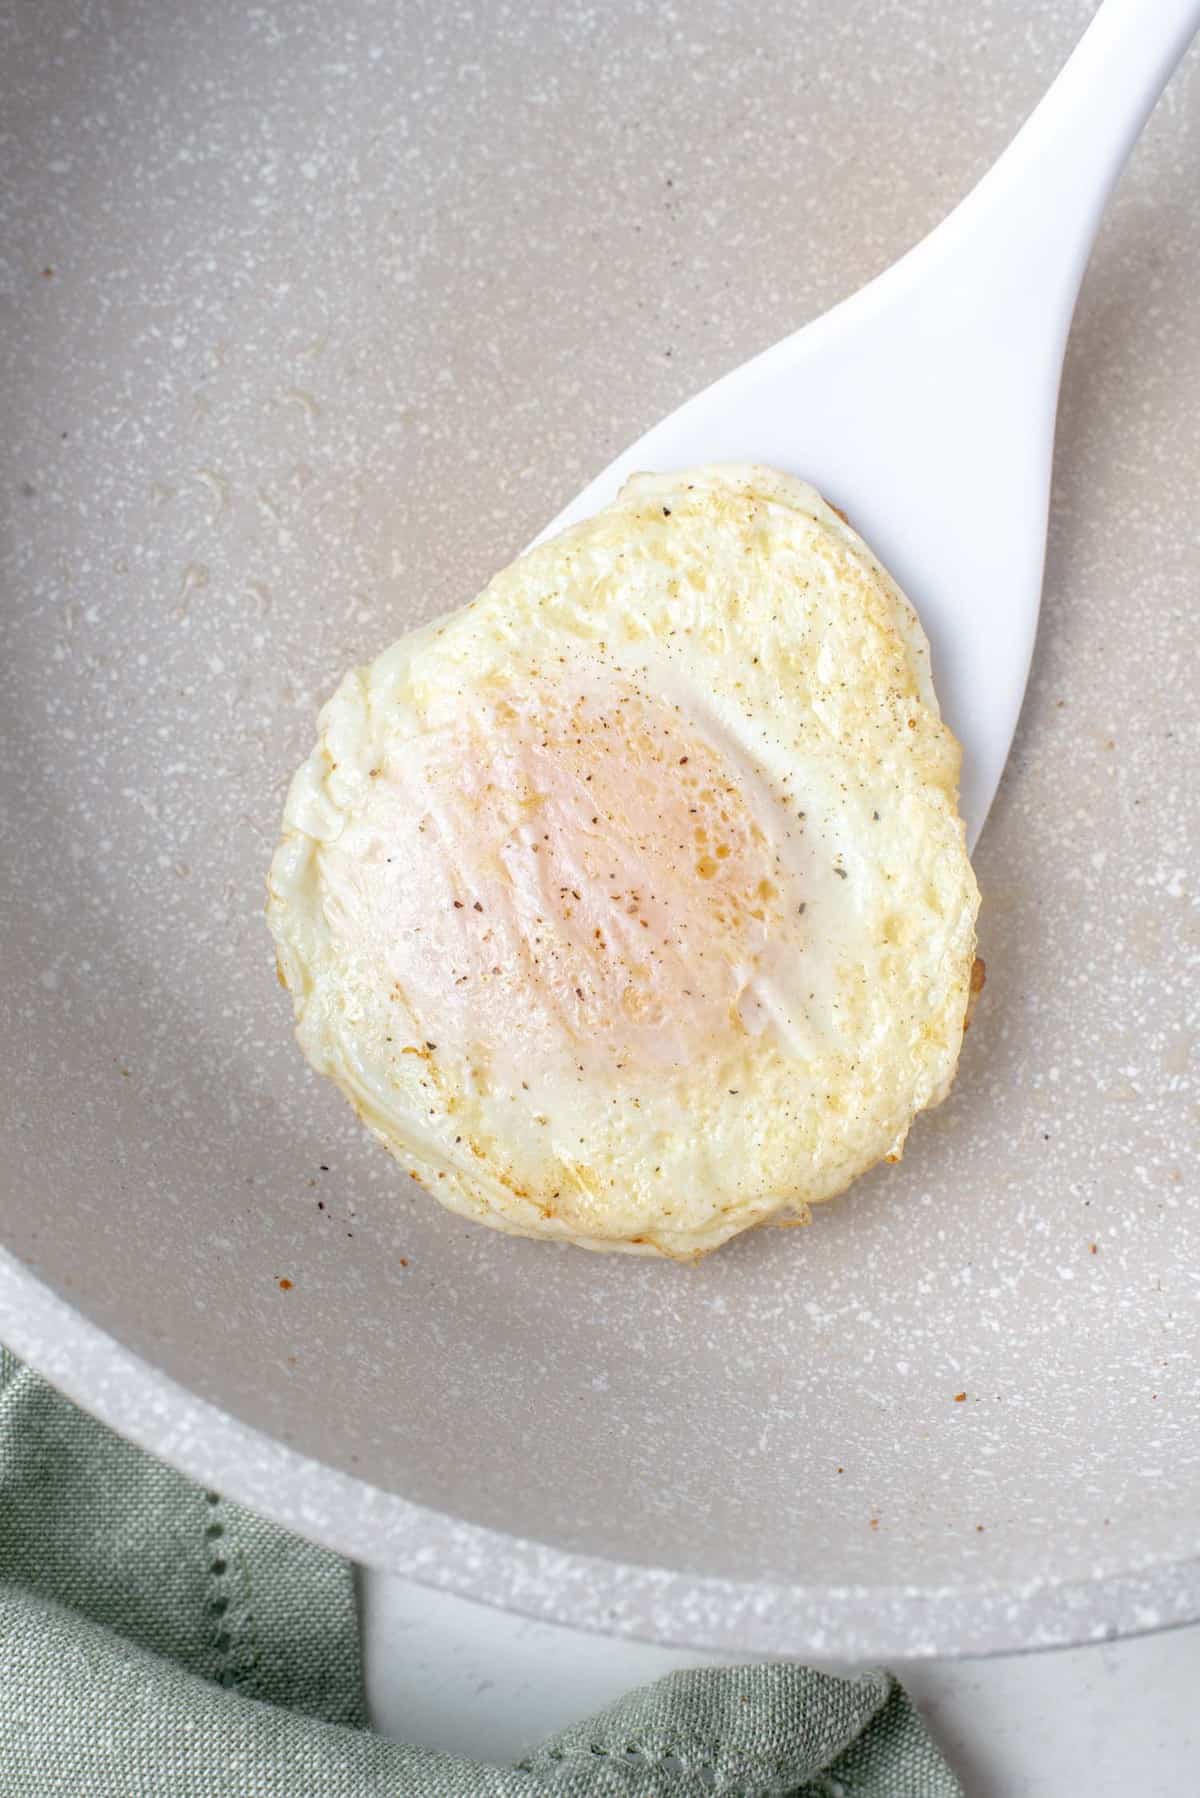 Egg being flipped with white spatula.